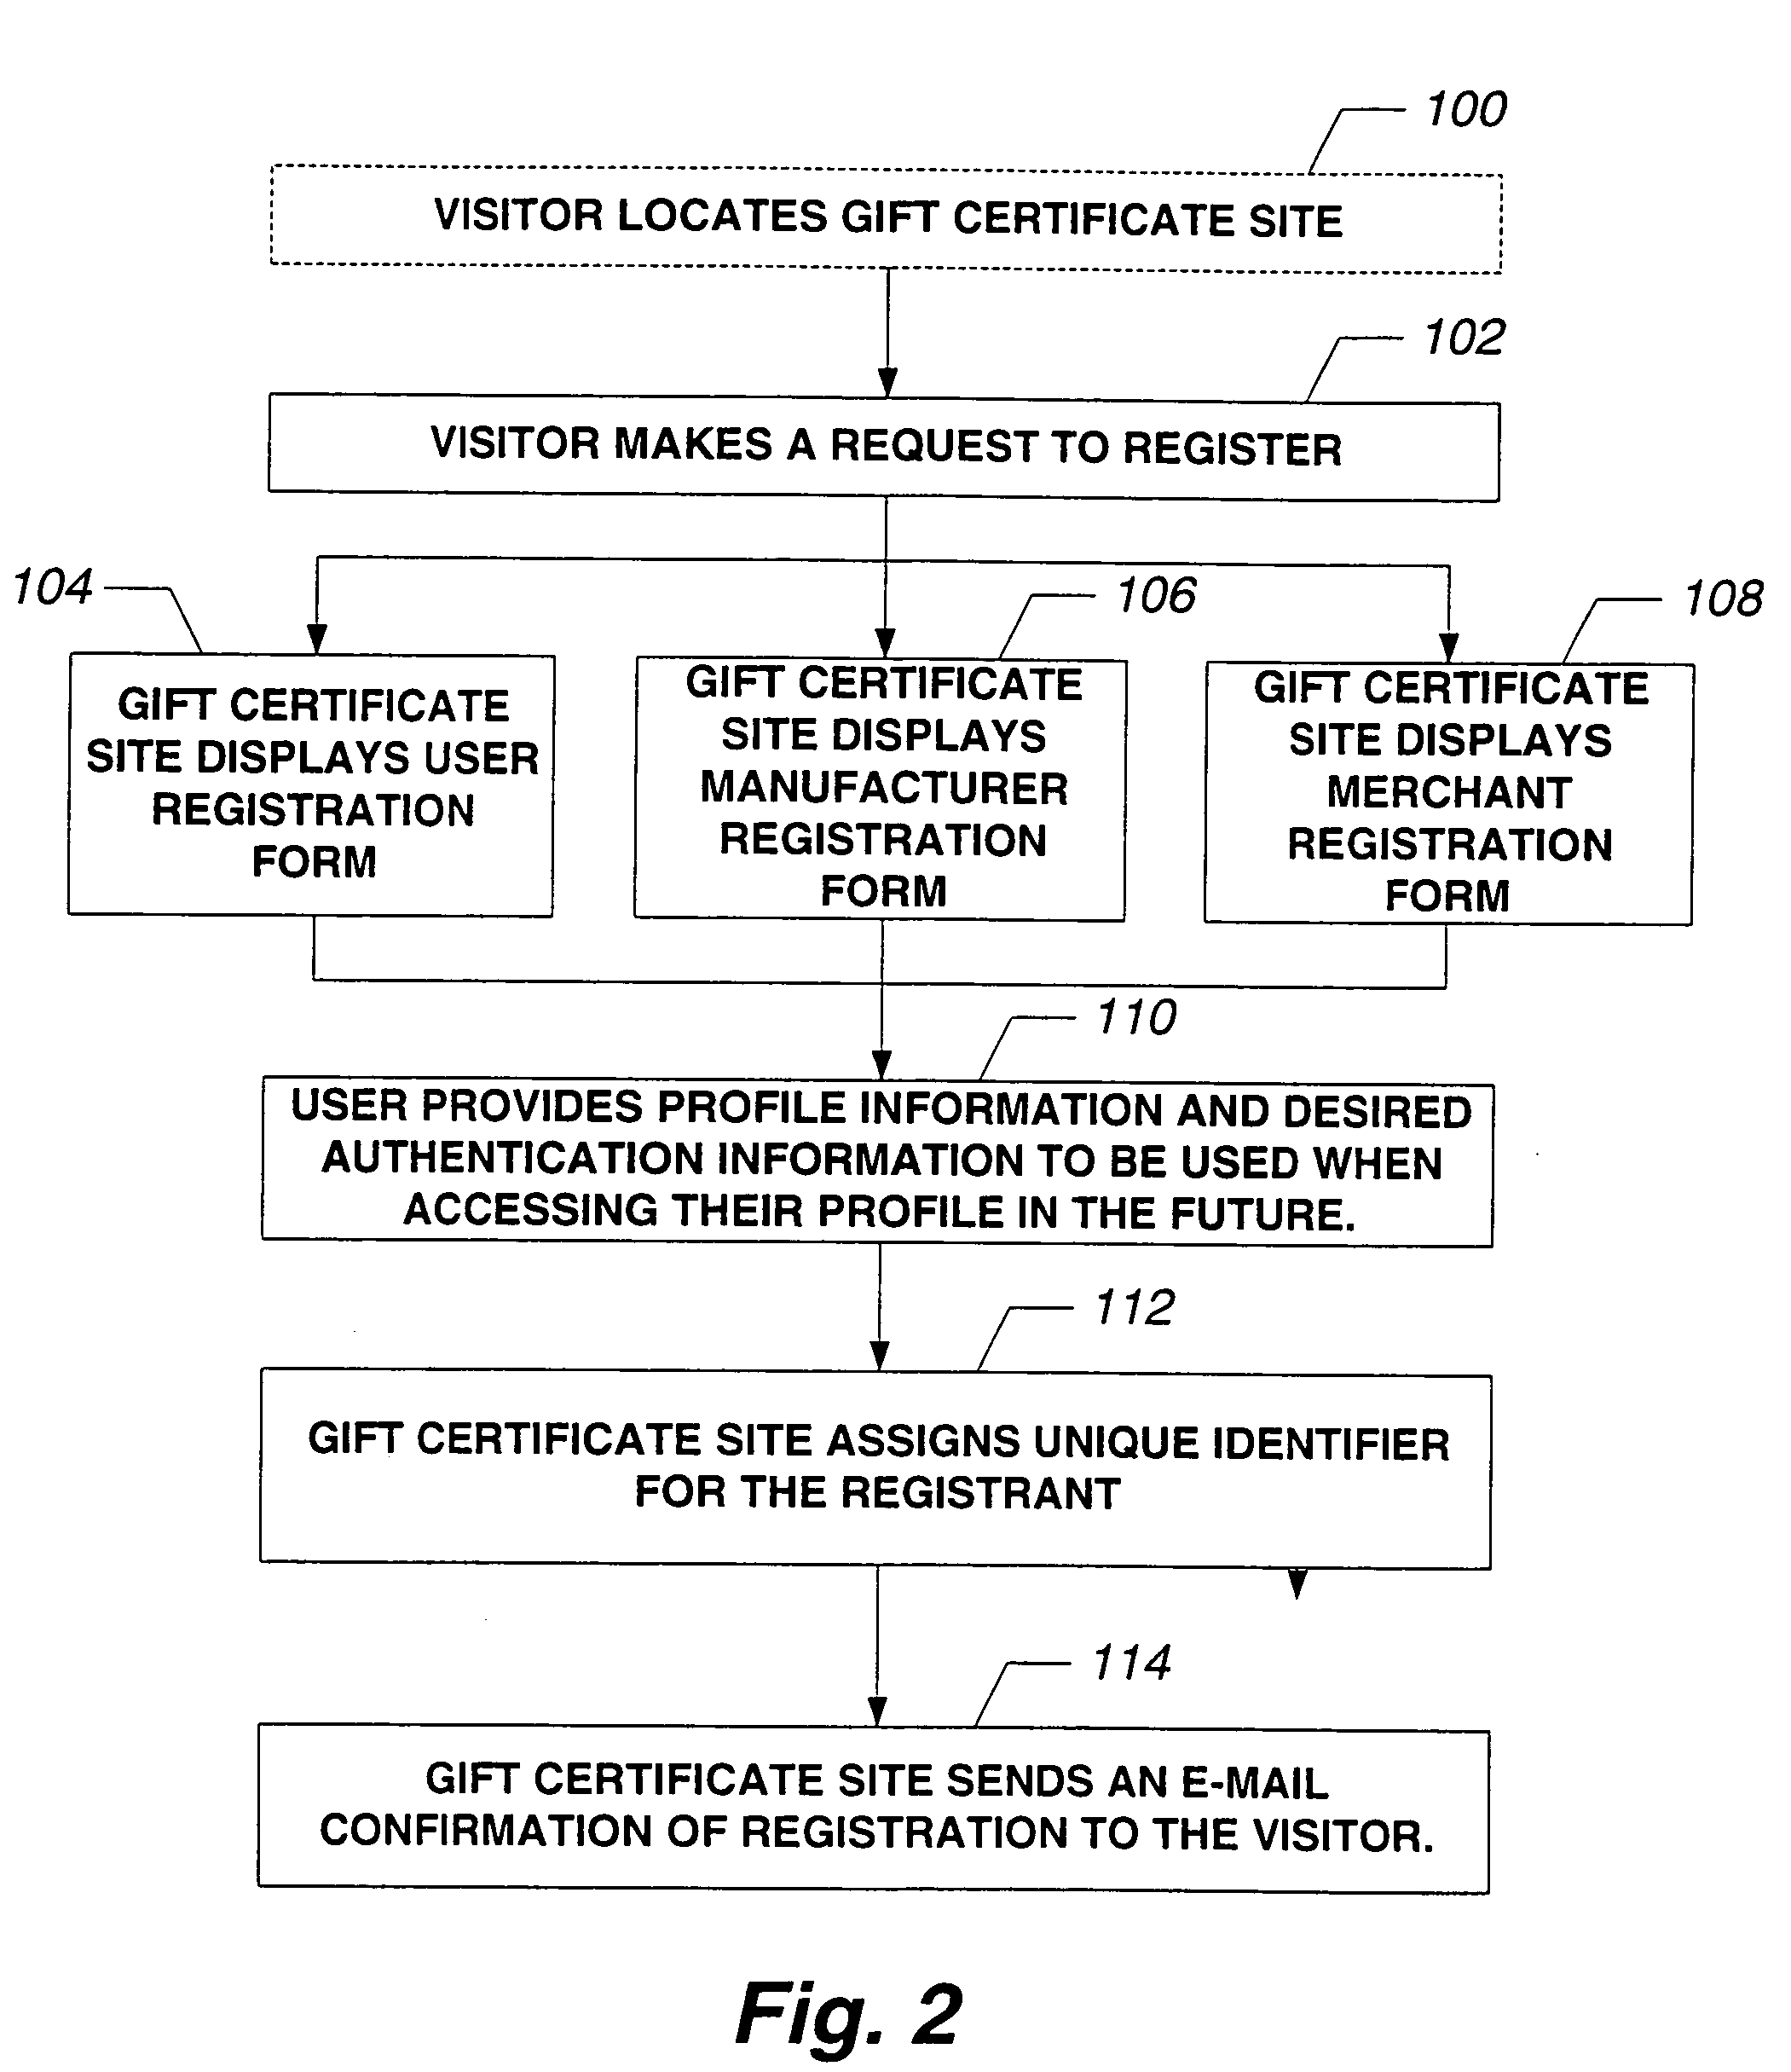 System and method for providing electronic multi-merchant gift certificate & contribution brokering services over a distributed network